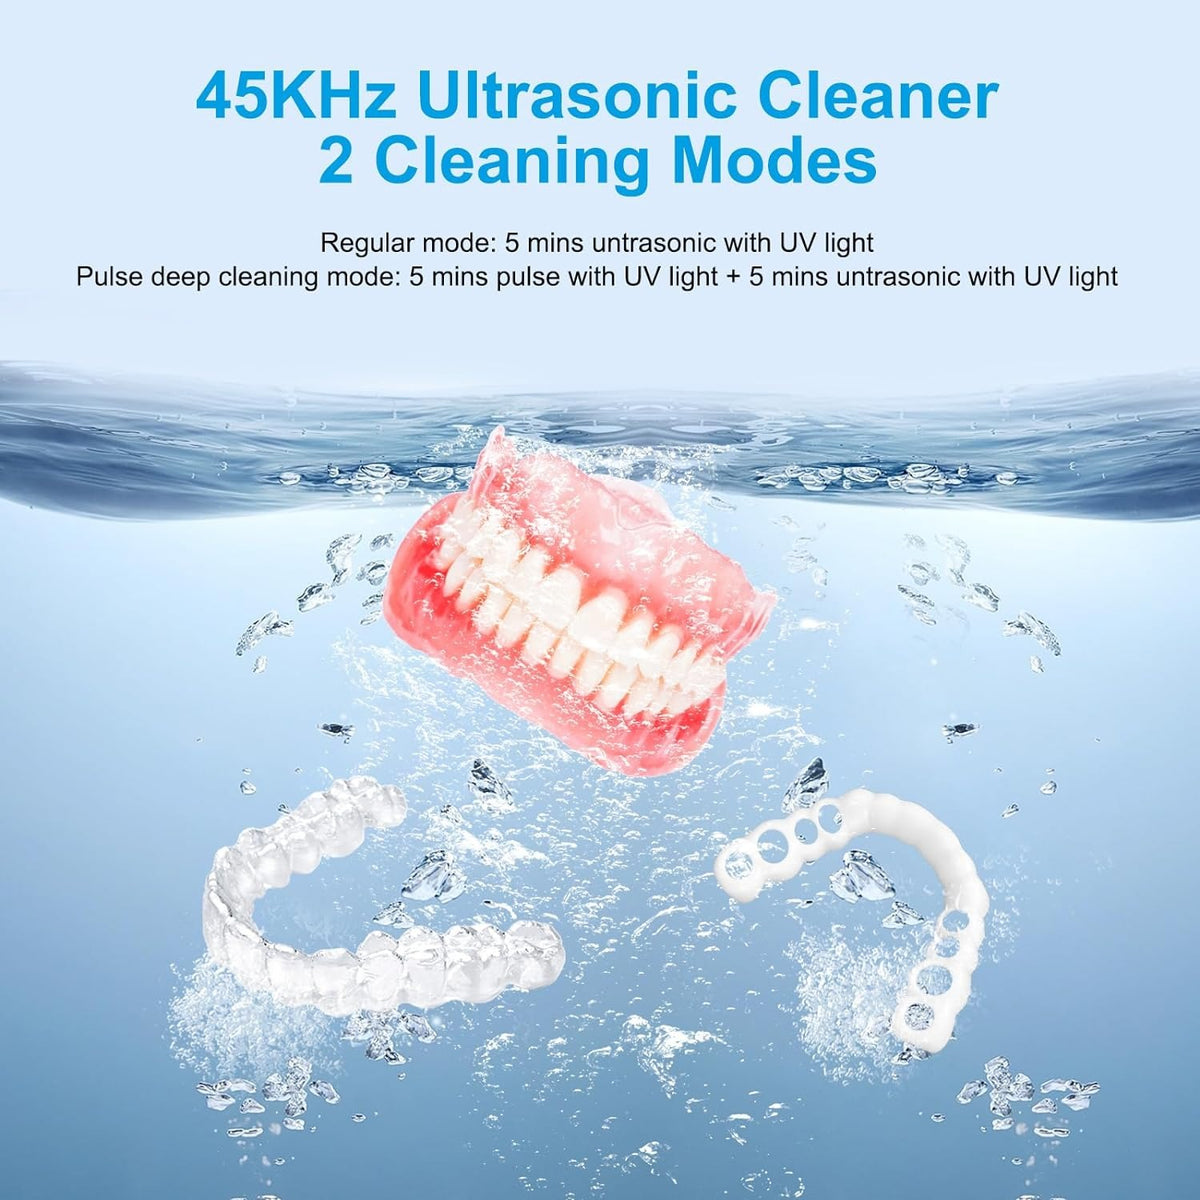 Ultrasonic UV Retainer Cleaner Machine - 45kHz Ultrasonic Cleaner for Dentures, Aligner, Mouth Guard, Whitening Trays, Toothbrush Head, Ultrasonic Cleaning for Jewelry, Diamonds